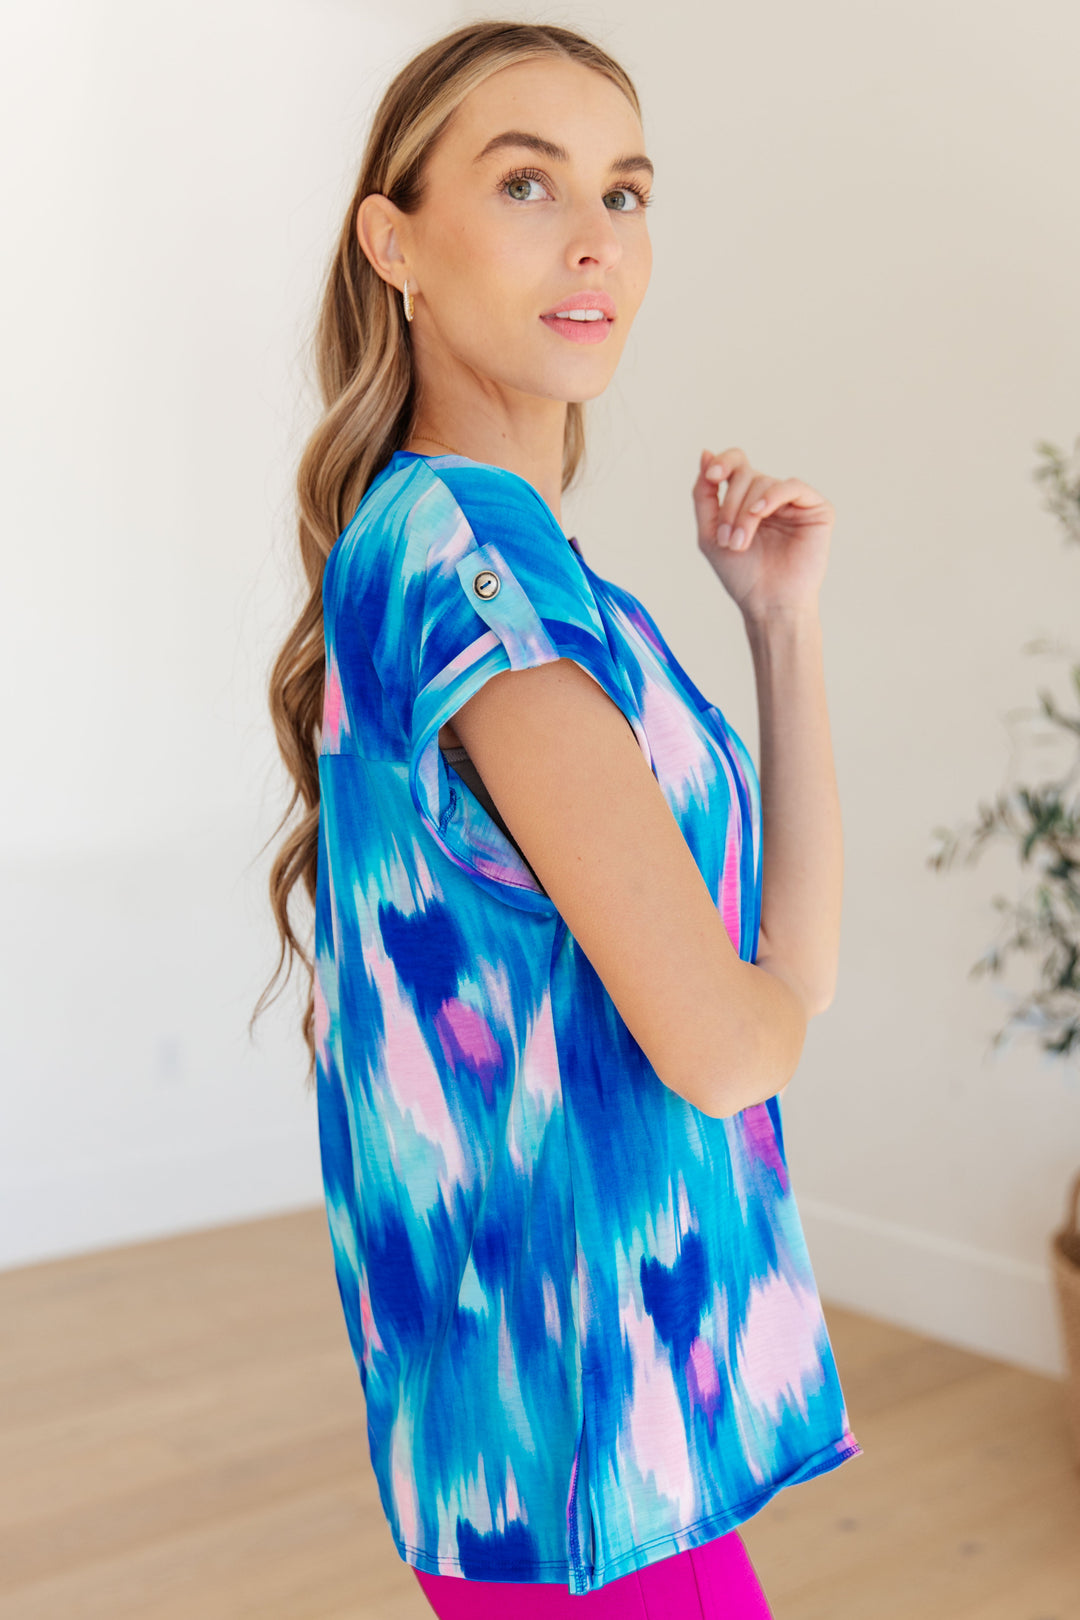 Lizzy Cap Sleeve Top in Royal Brush Strokes-Short Sleeve Tops-Inspired by Justeen-Women's Clothing Boutique in Chicago, Illinois